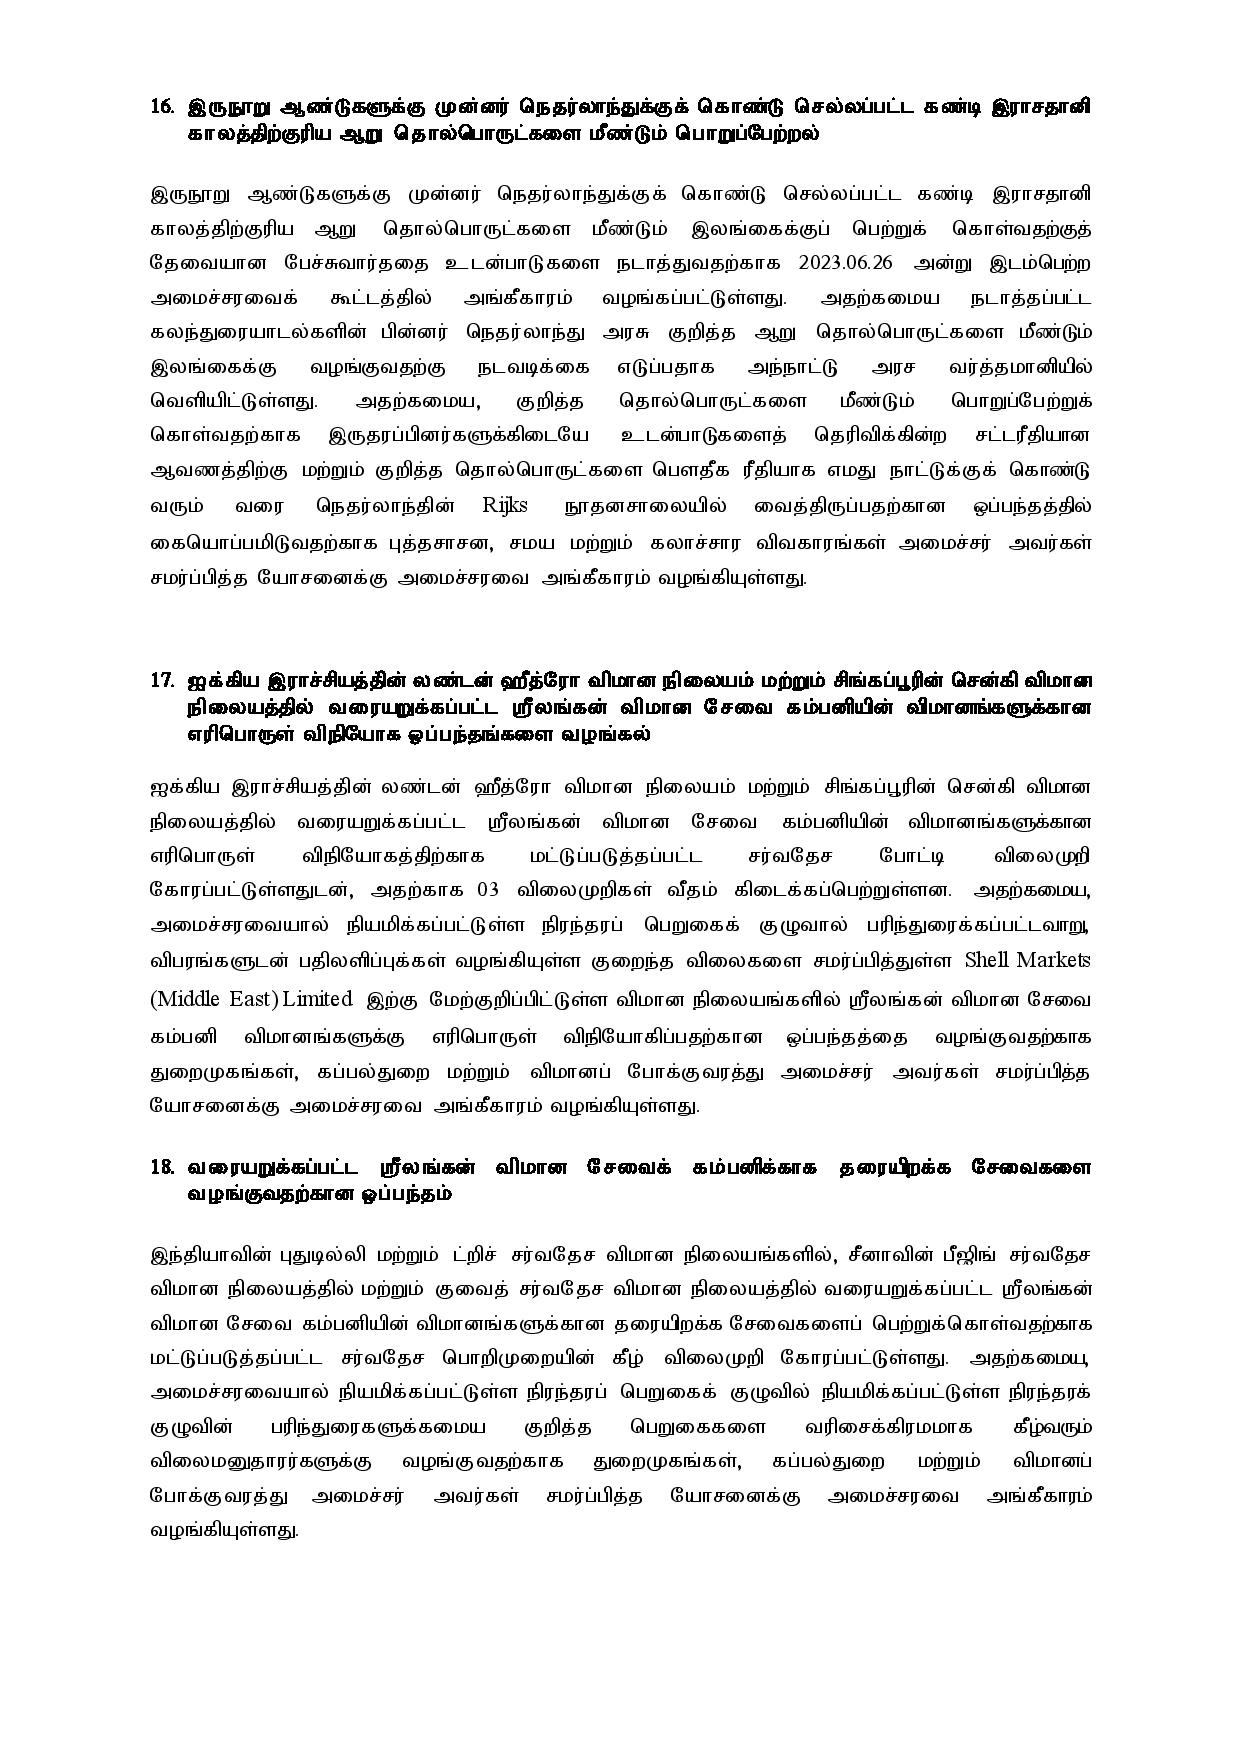 Cabinet Decision on 28.08.2023 Tamil page 006